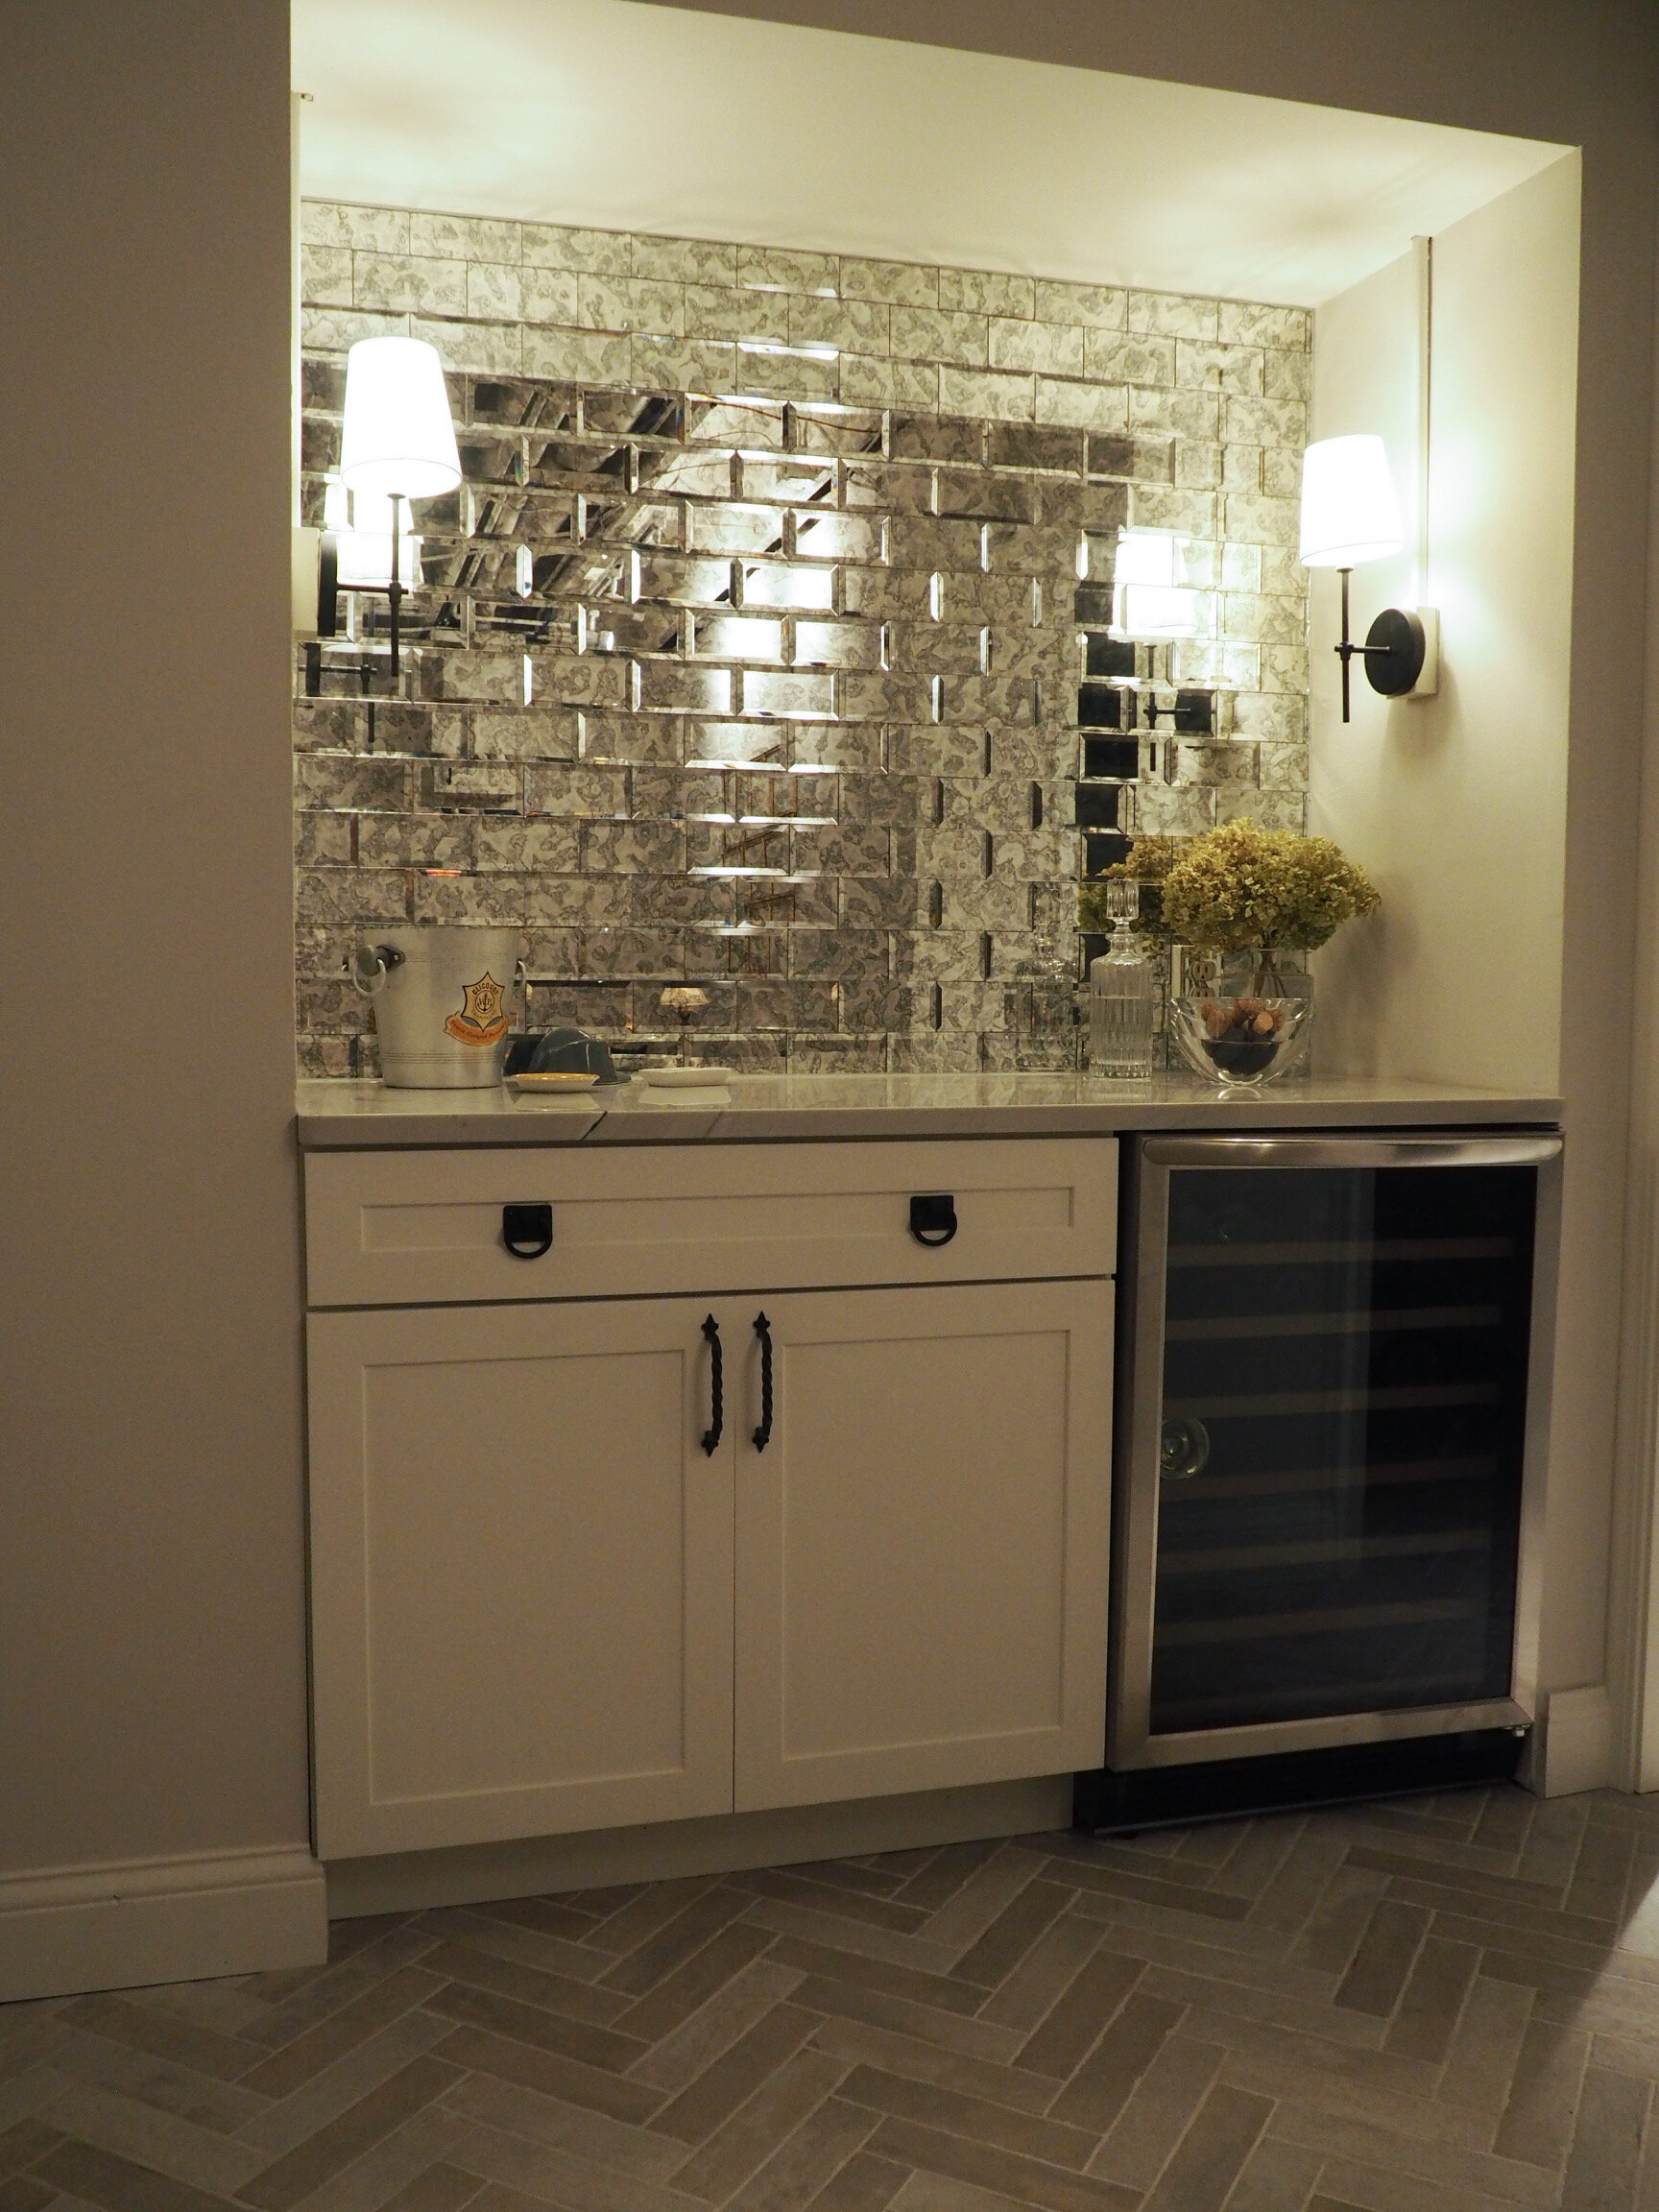 Our dry bar and wine fridge; the antique mirrored subway tile adds some depth and sparkle